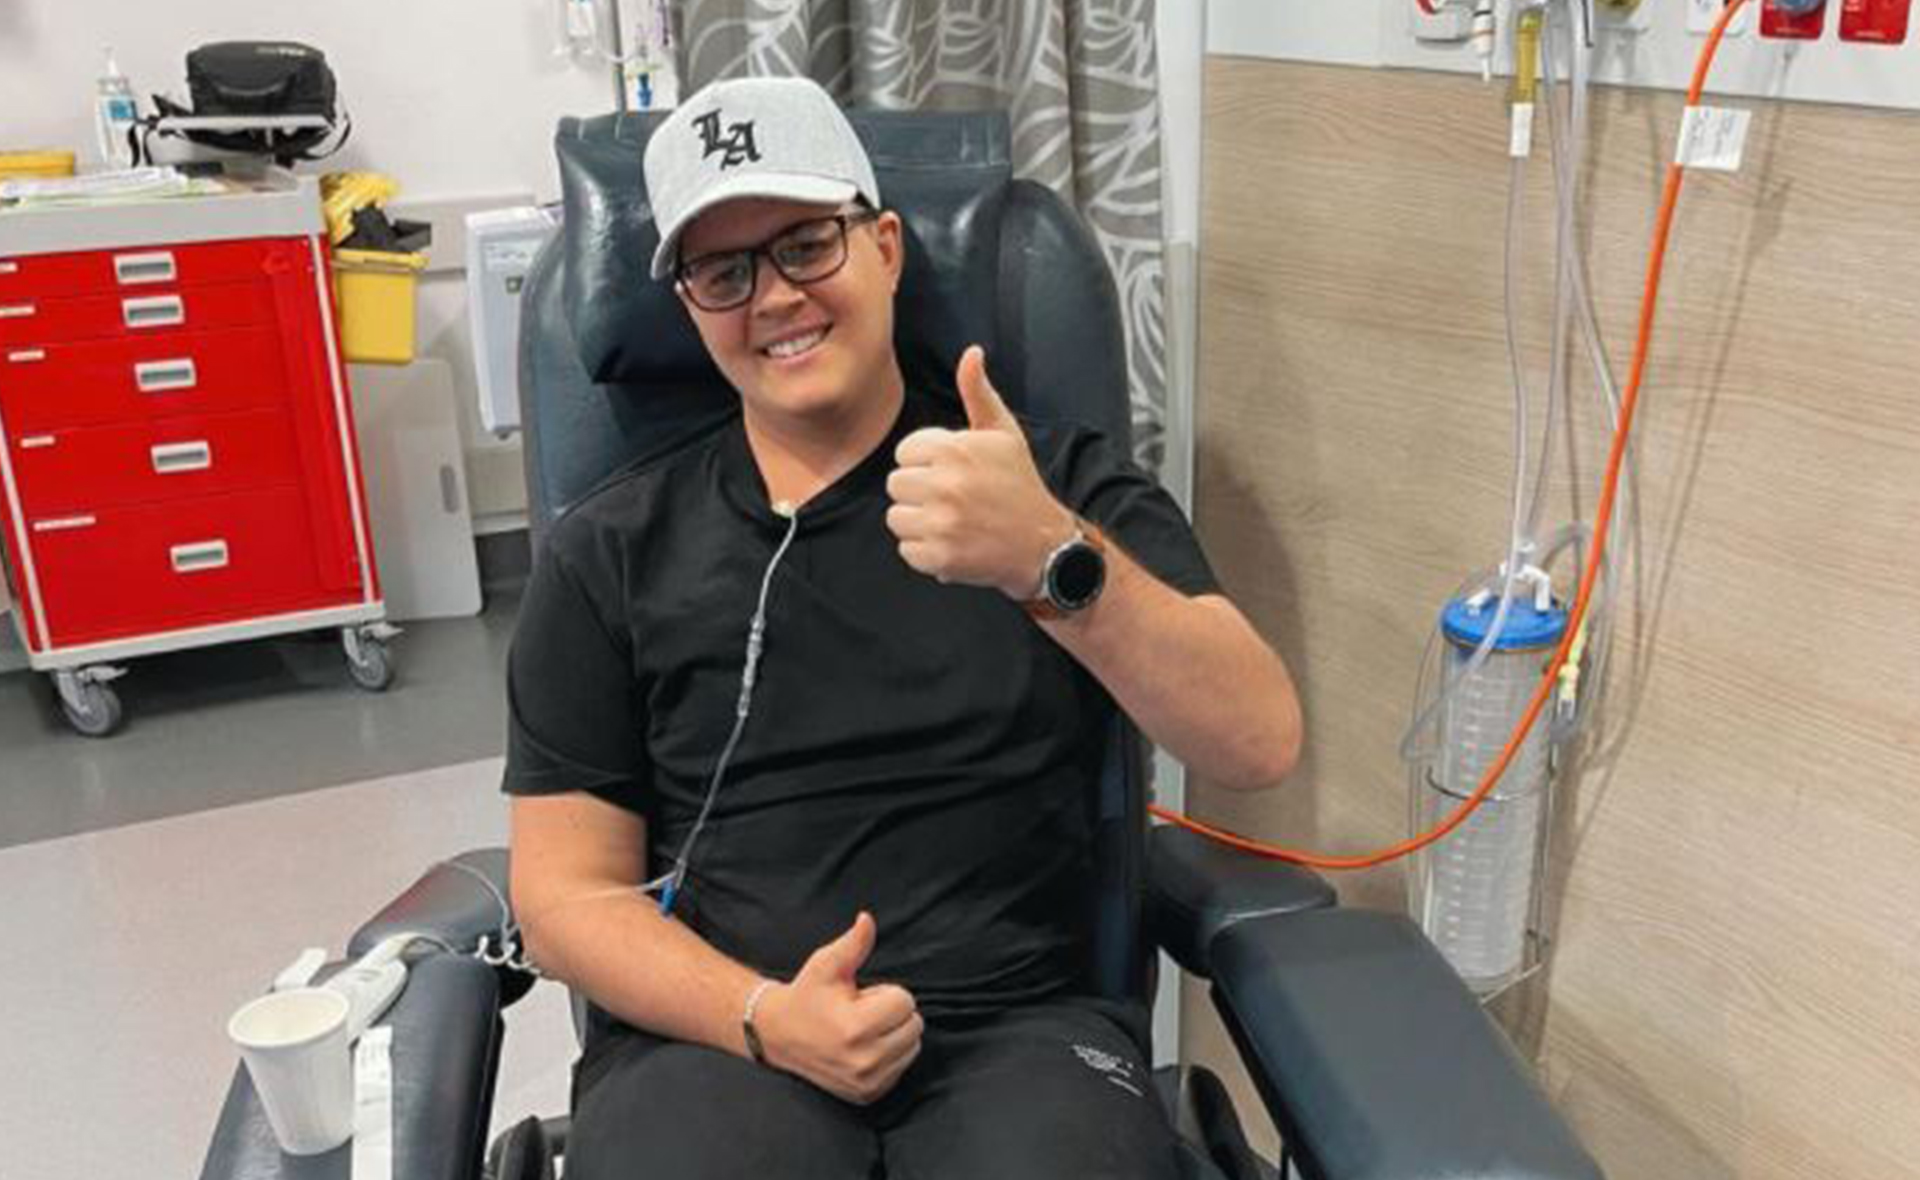 The ever courageous Johnny Ruffo returns to hospital to undergo more cancer treatment